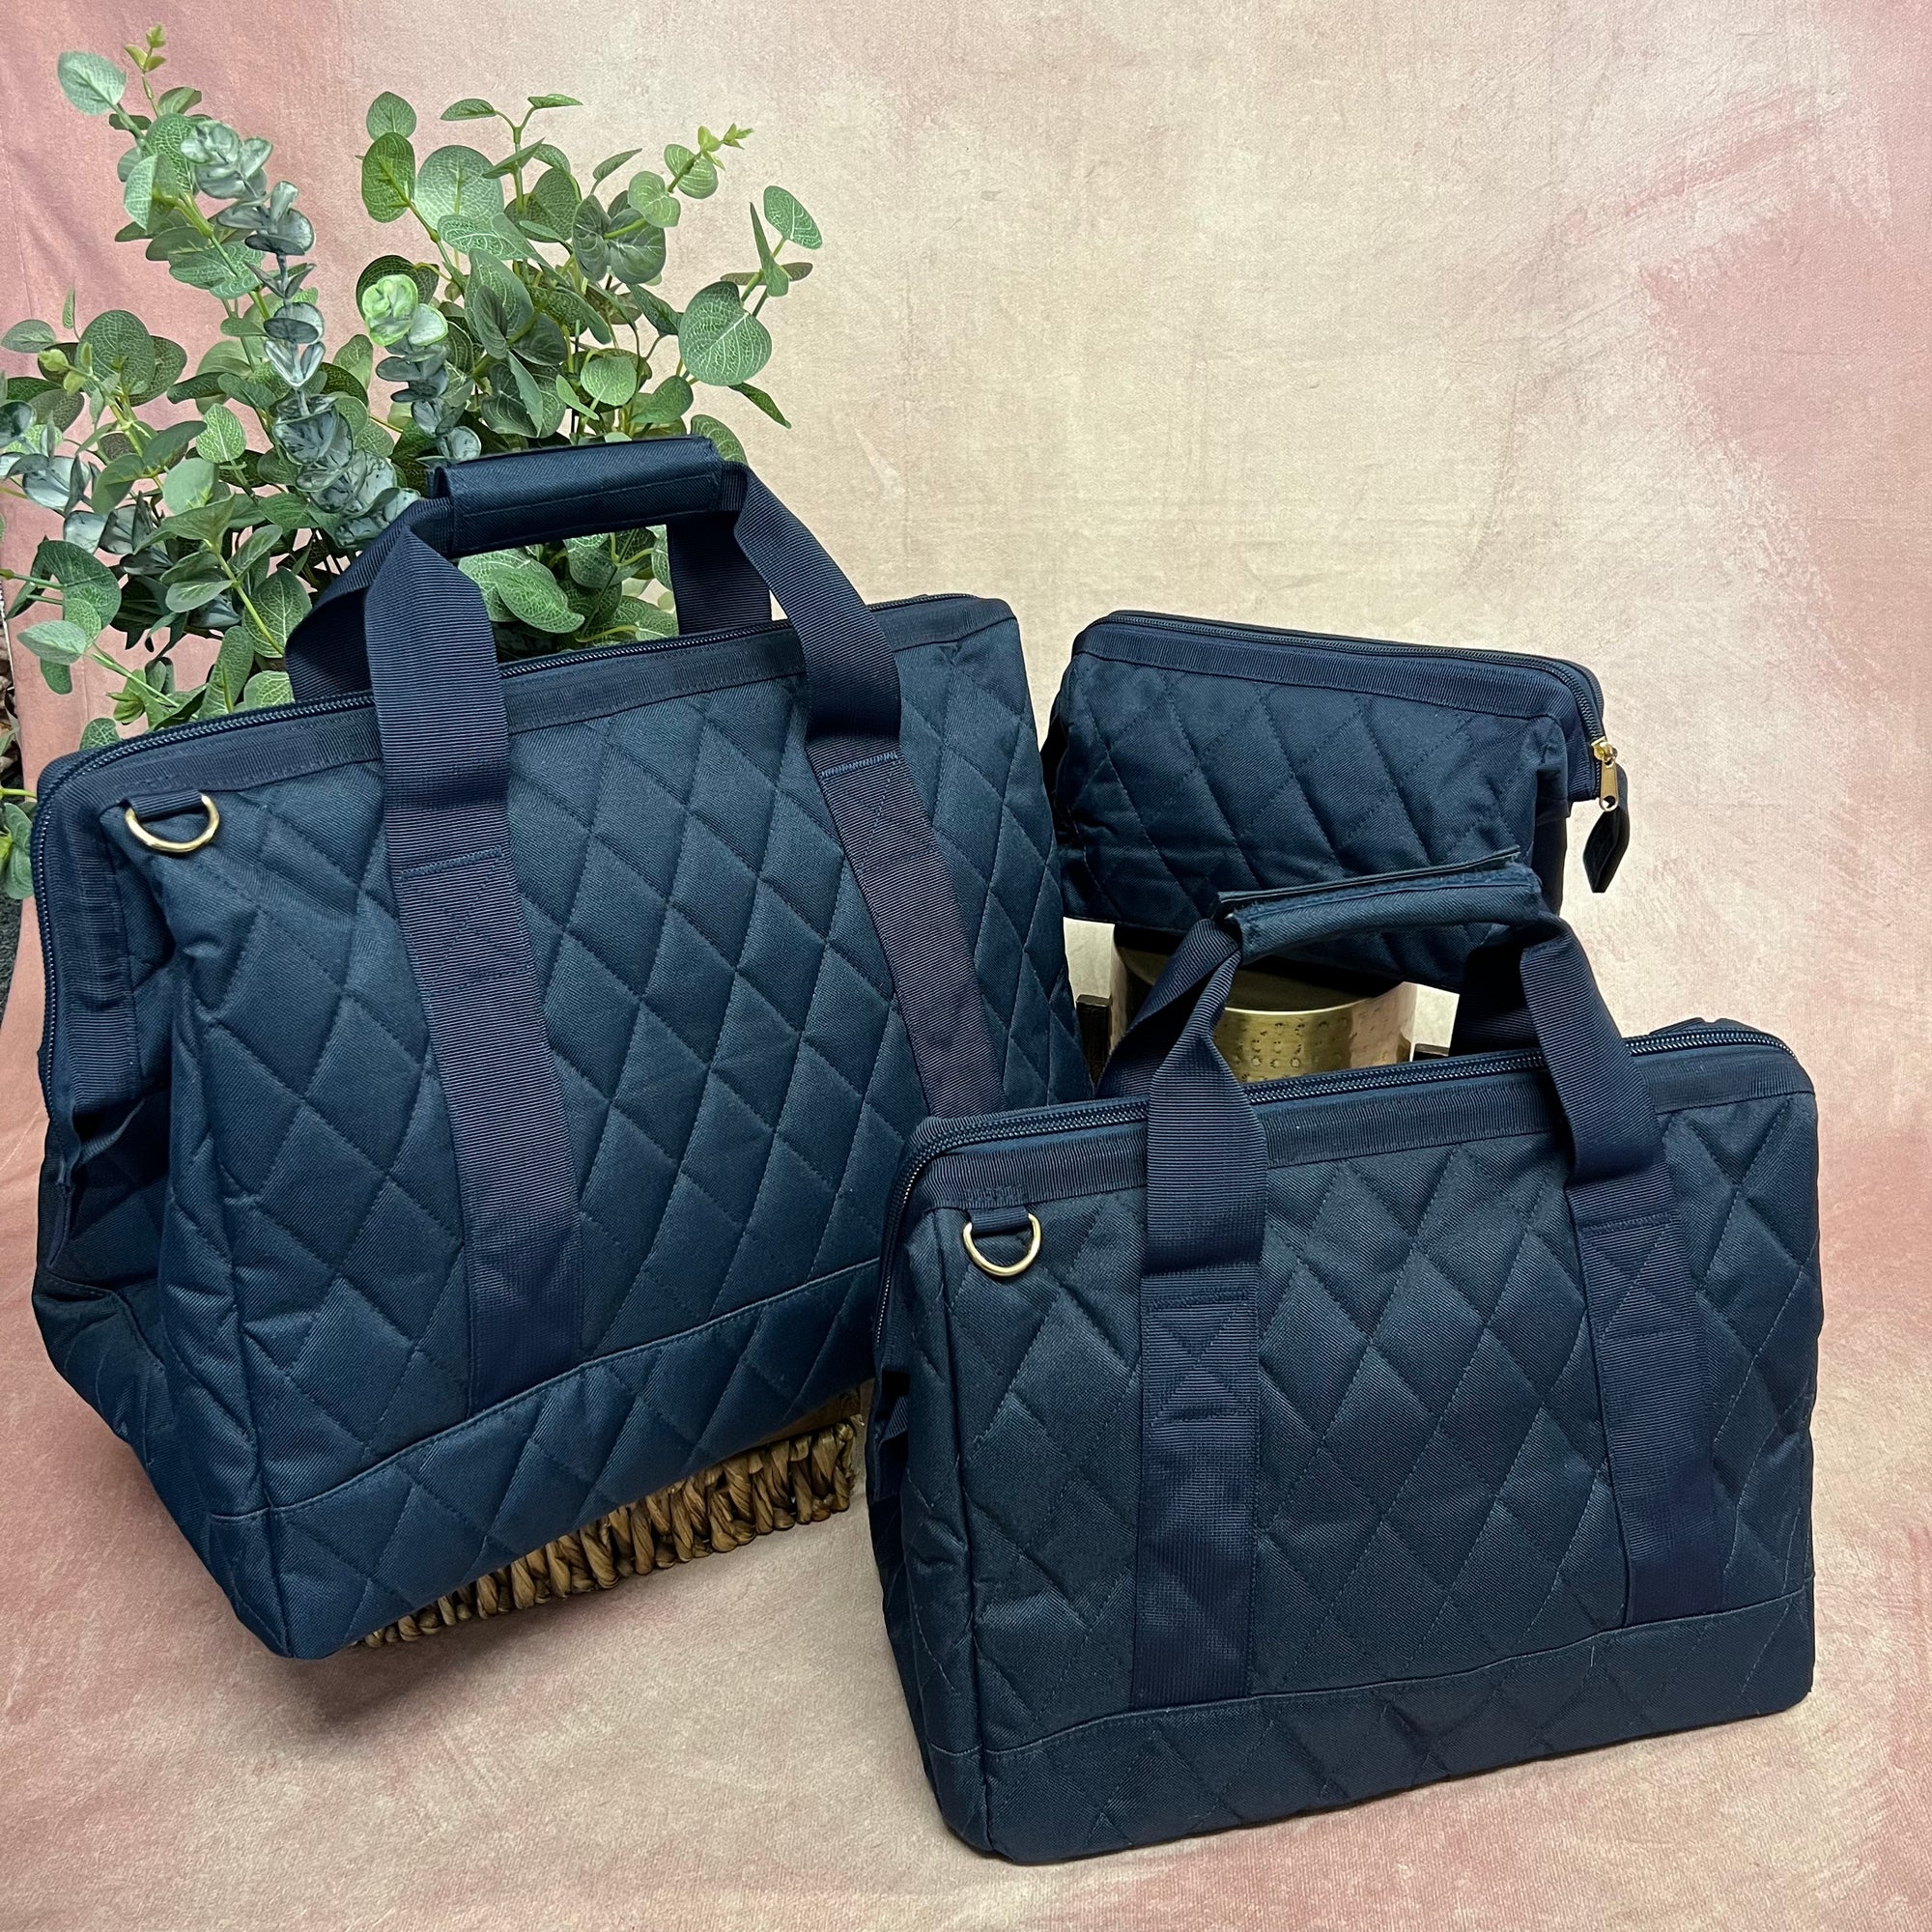 Classic Navy Quilted Bag Sets